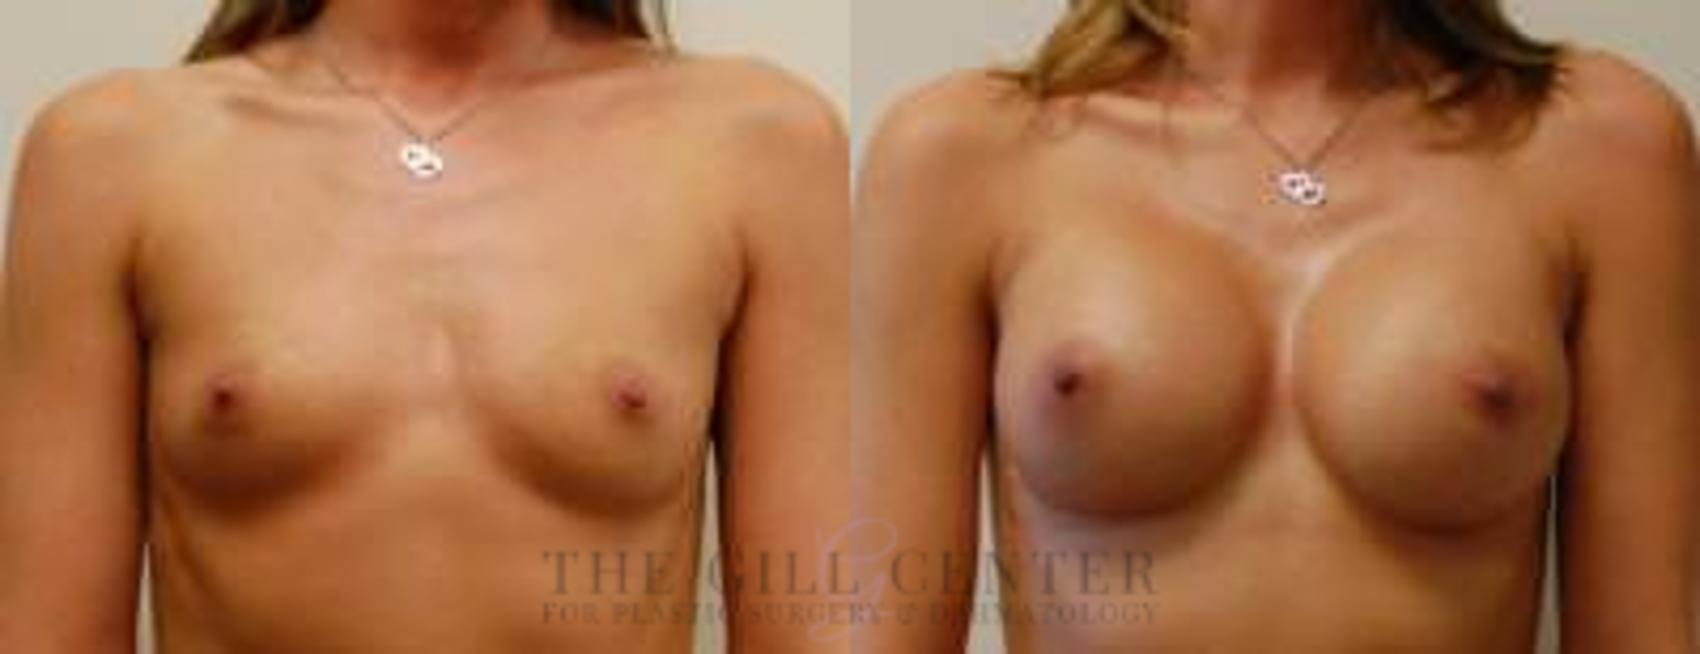 Breast Augmentation Case 59 Before & After Front | The Woodlands, TX | The Gill Center for Plastic Surgery and Dermatology